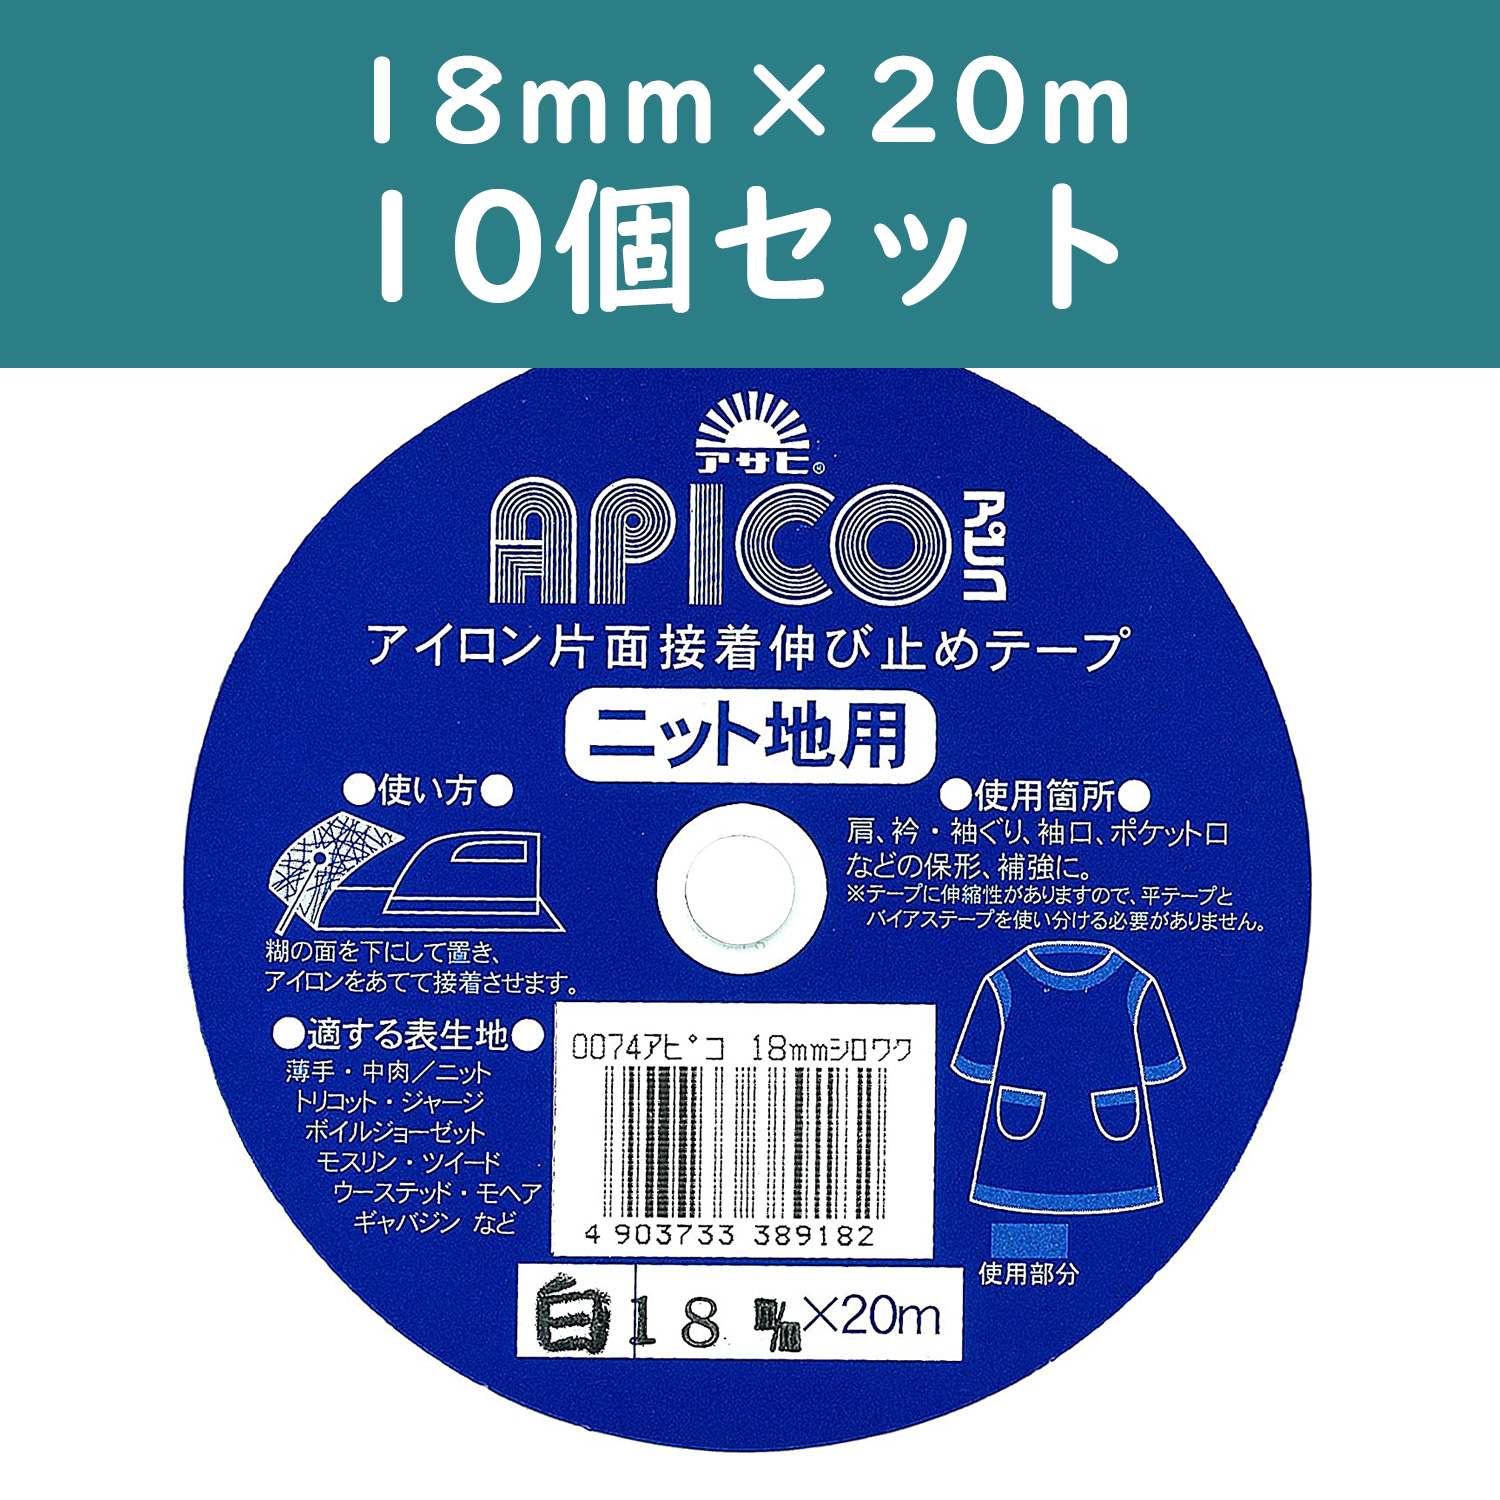 F9-APC18-W-10 Apiko Tape, stops stretchy fabric from wearing out 18mm x 20m　10 pcs set (set)